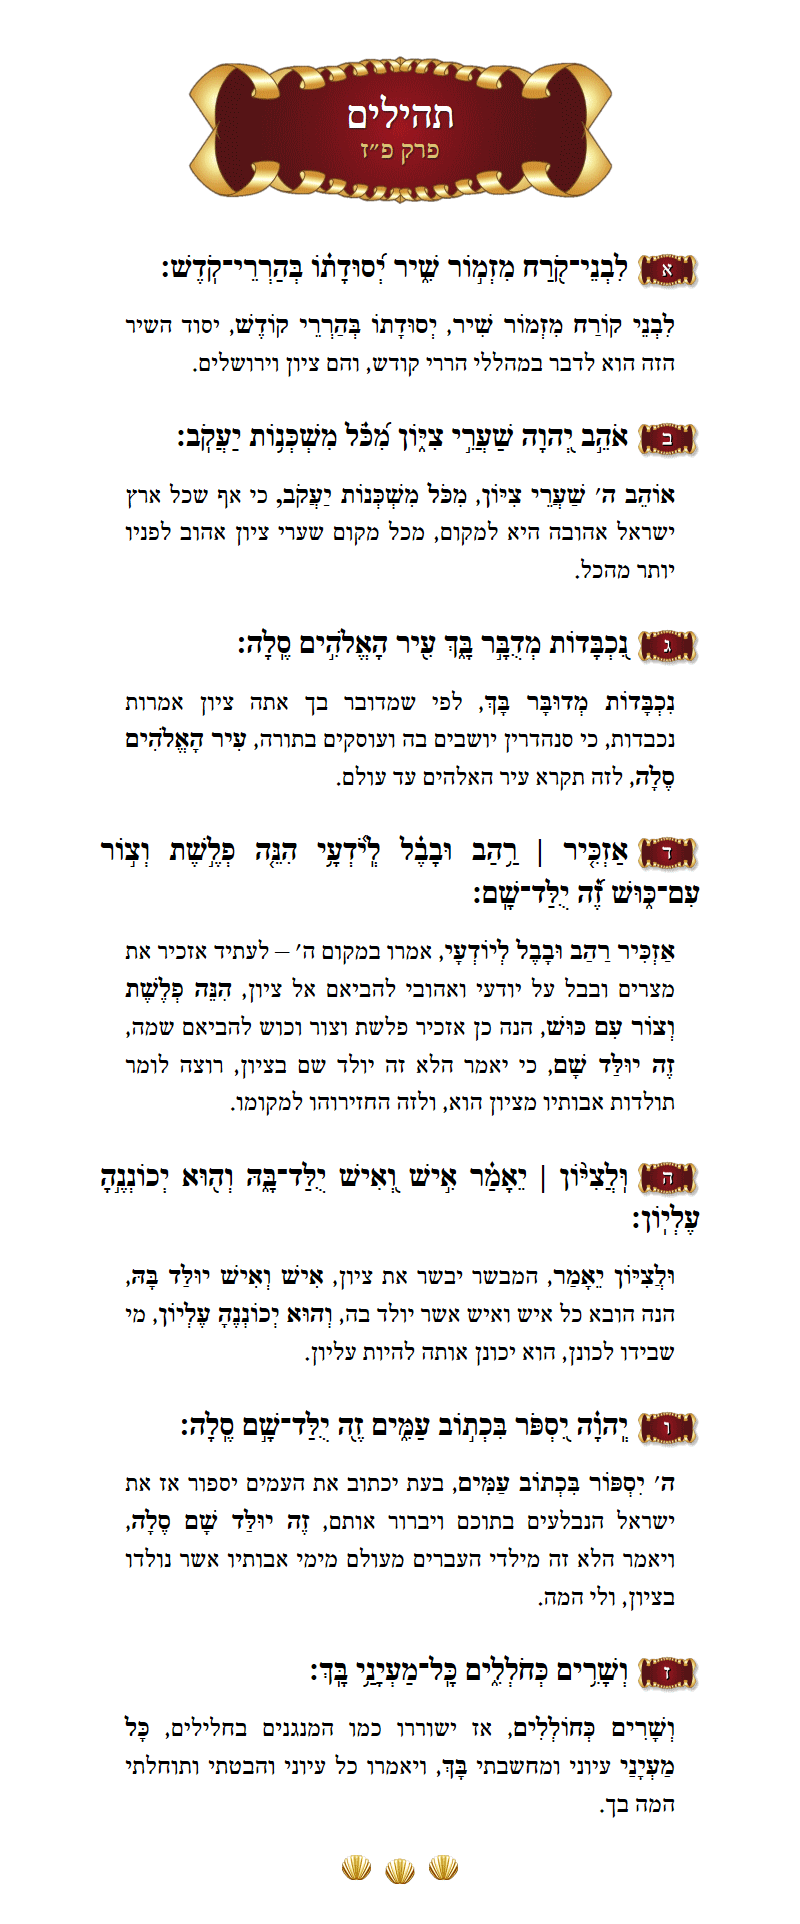 Sefer Tehillim Chapter 87 with commentary